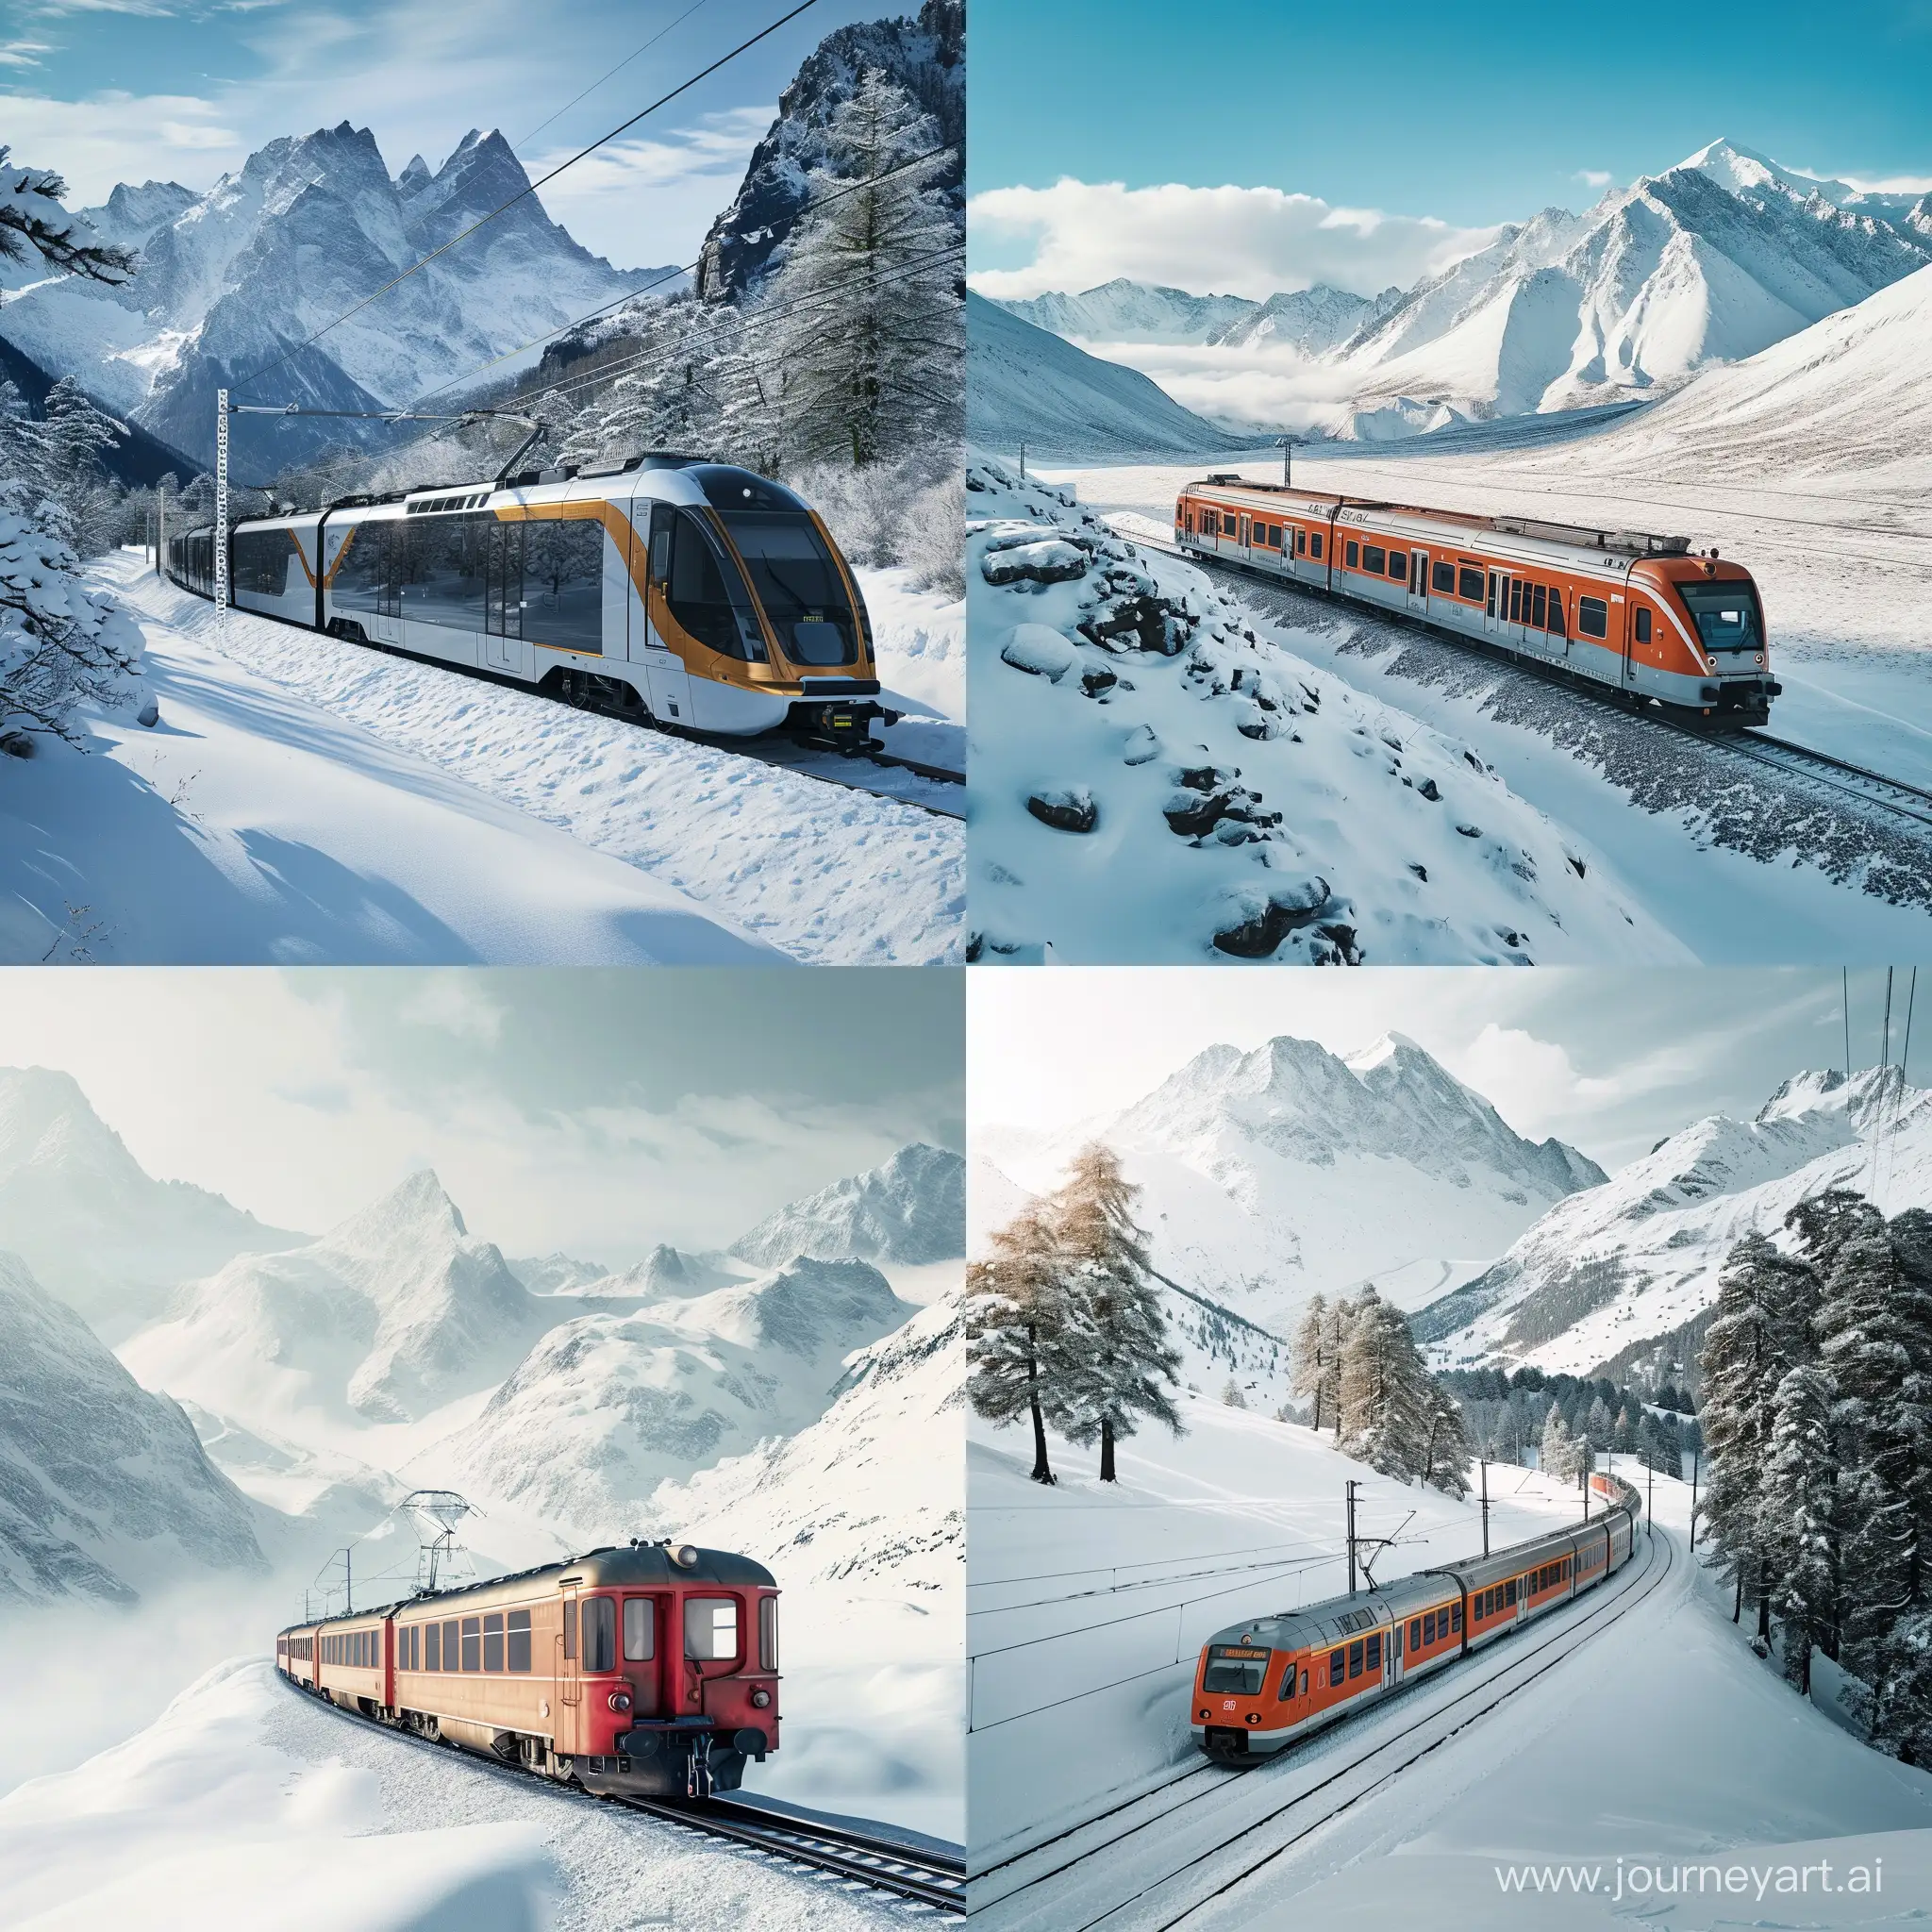 a true realistic train in the middle of snowy mountains